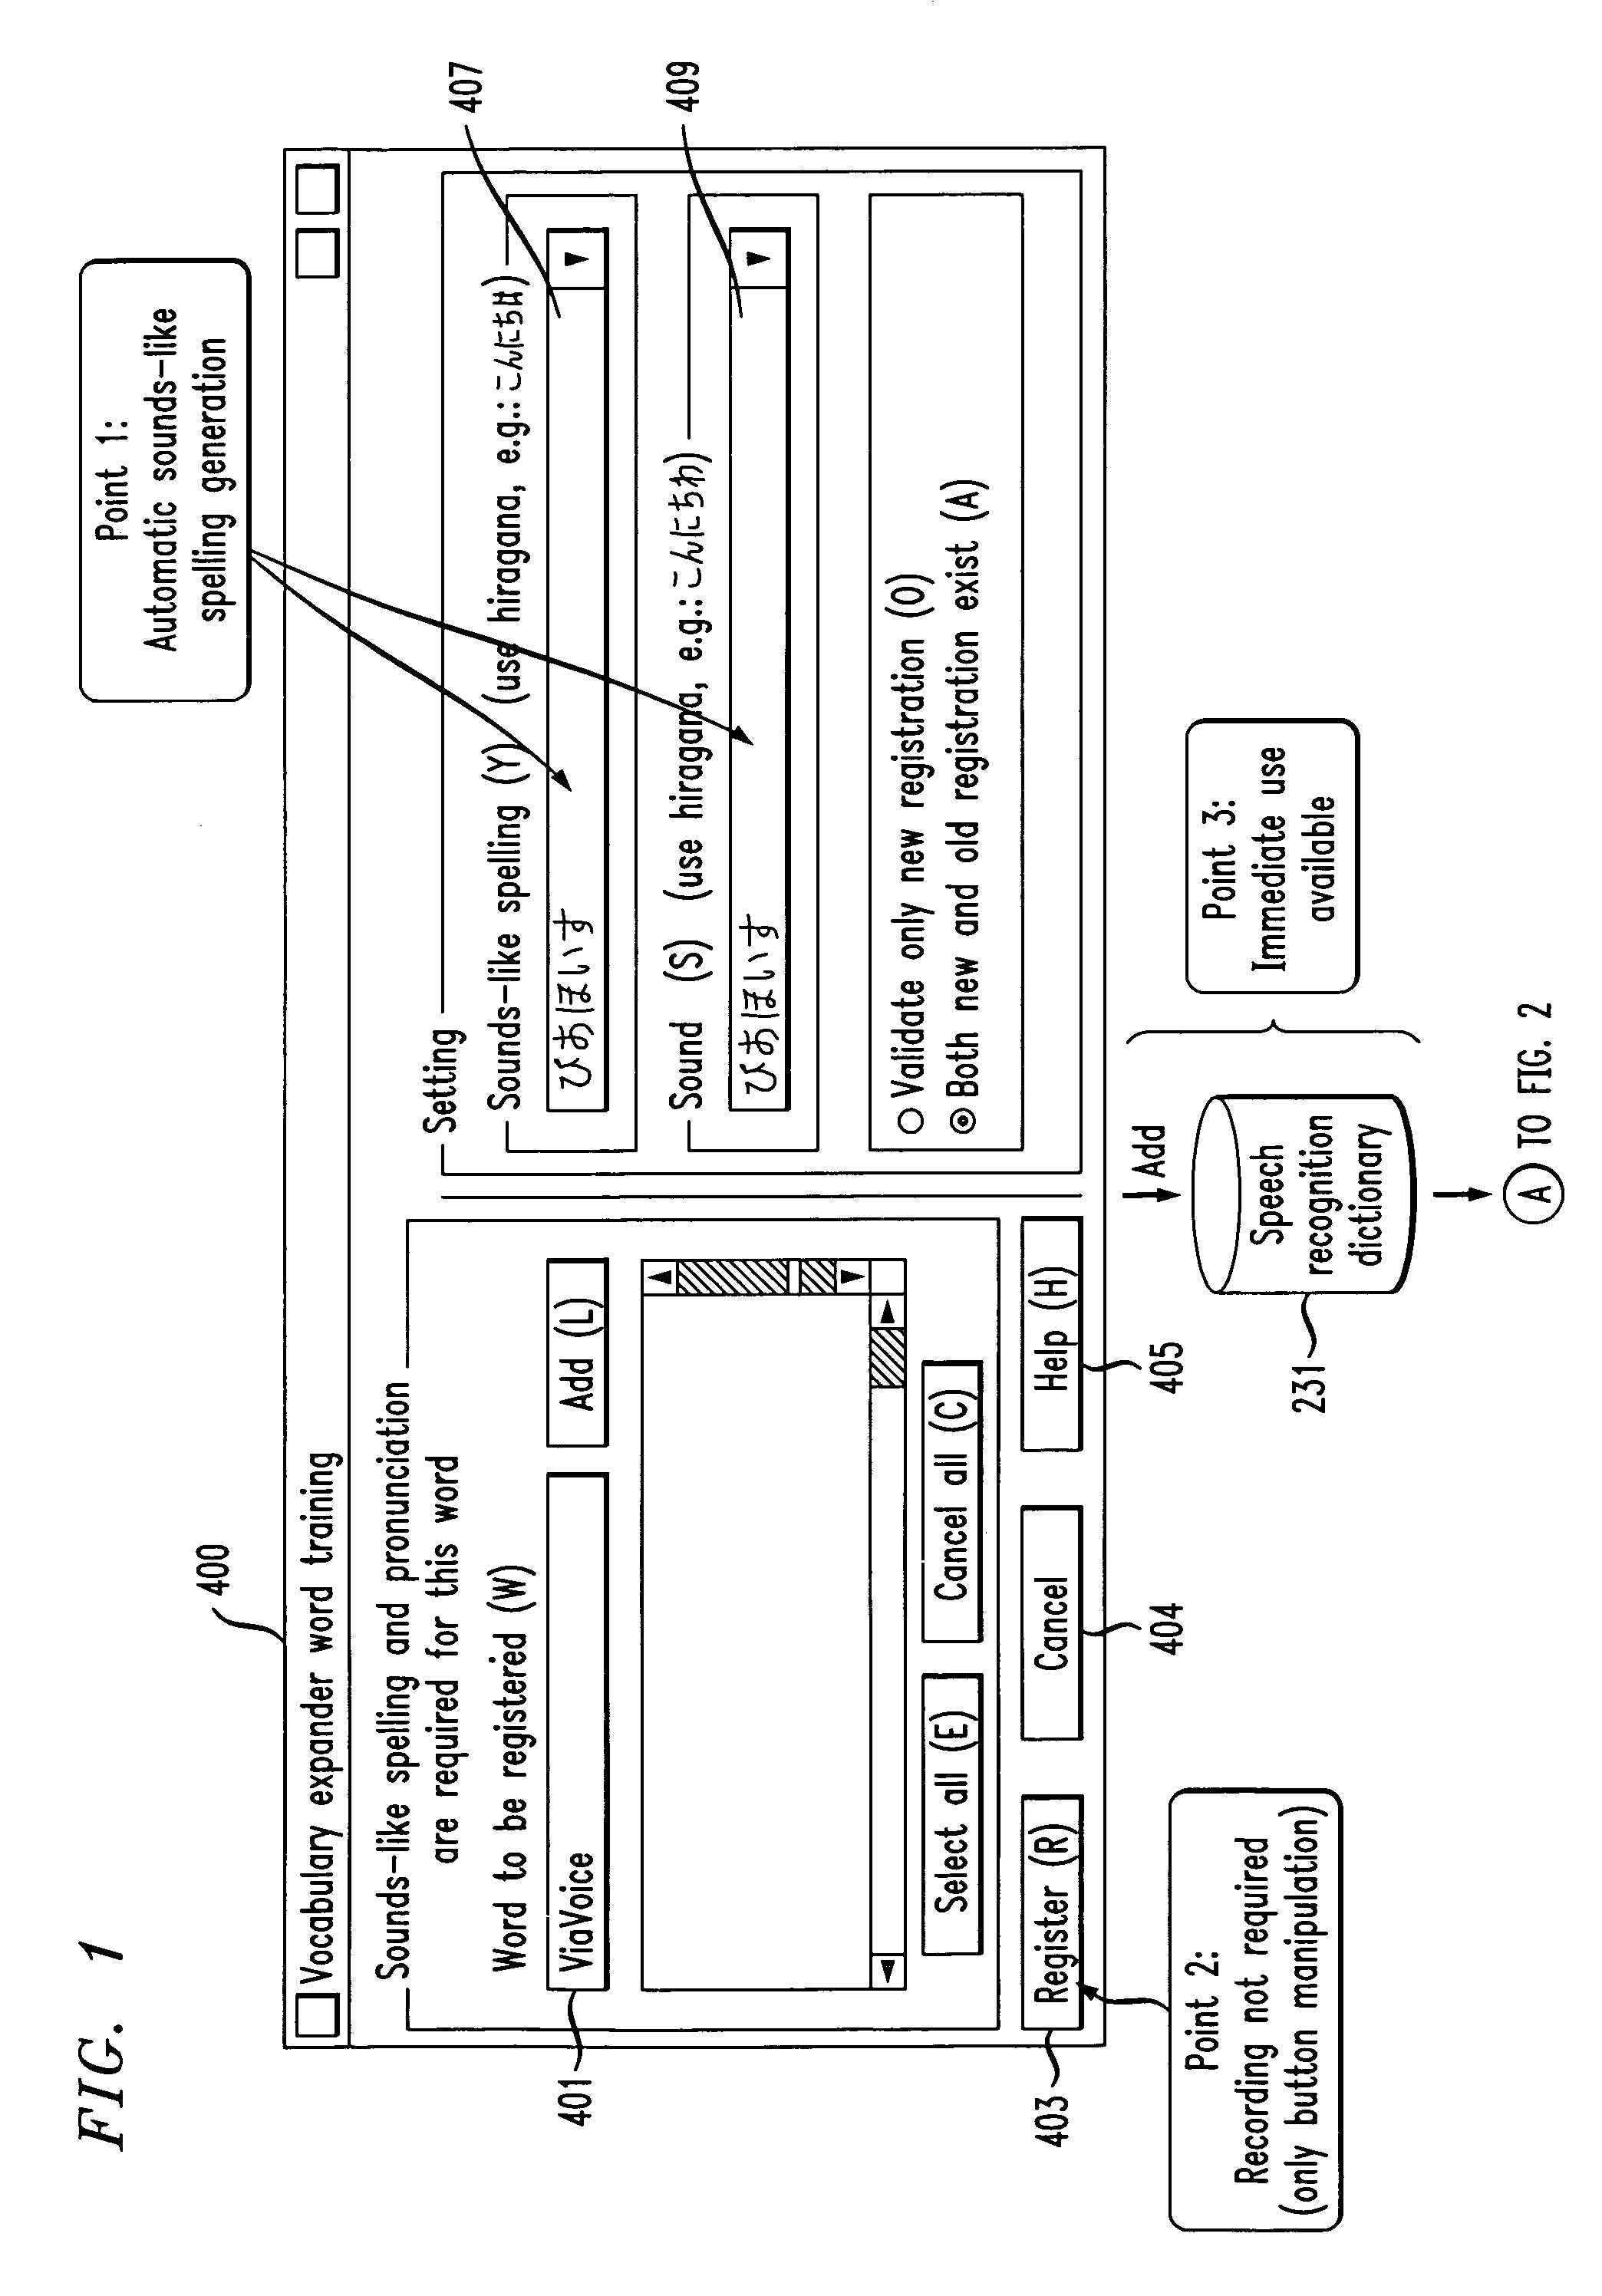 Methods and apparatus for recognized word registration in accordance with speech recognition